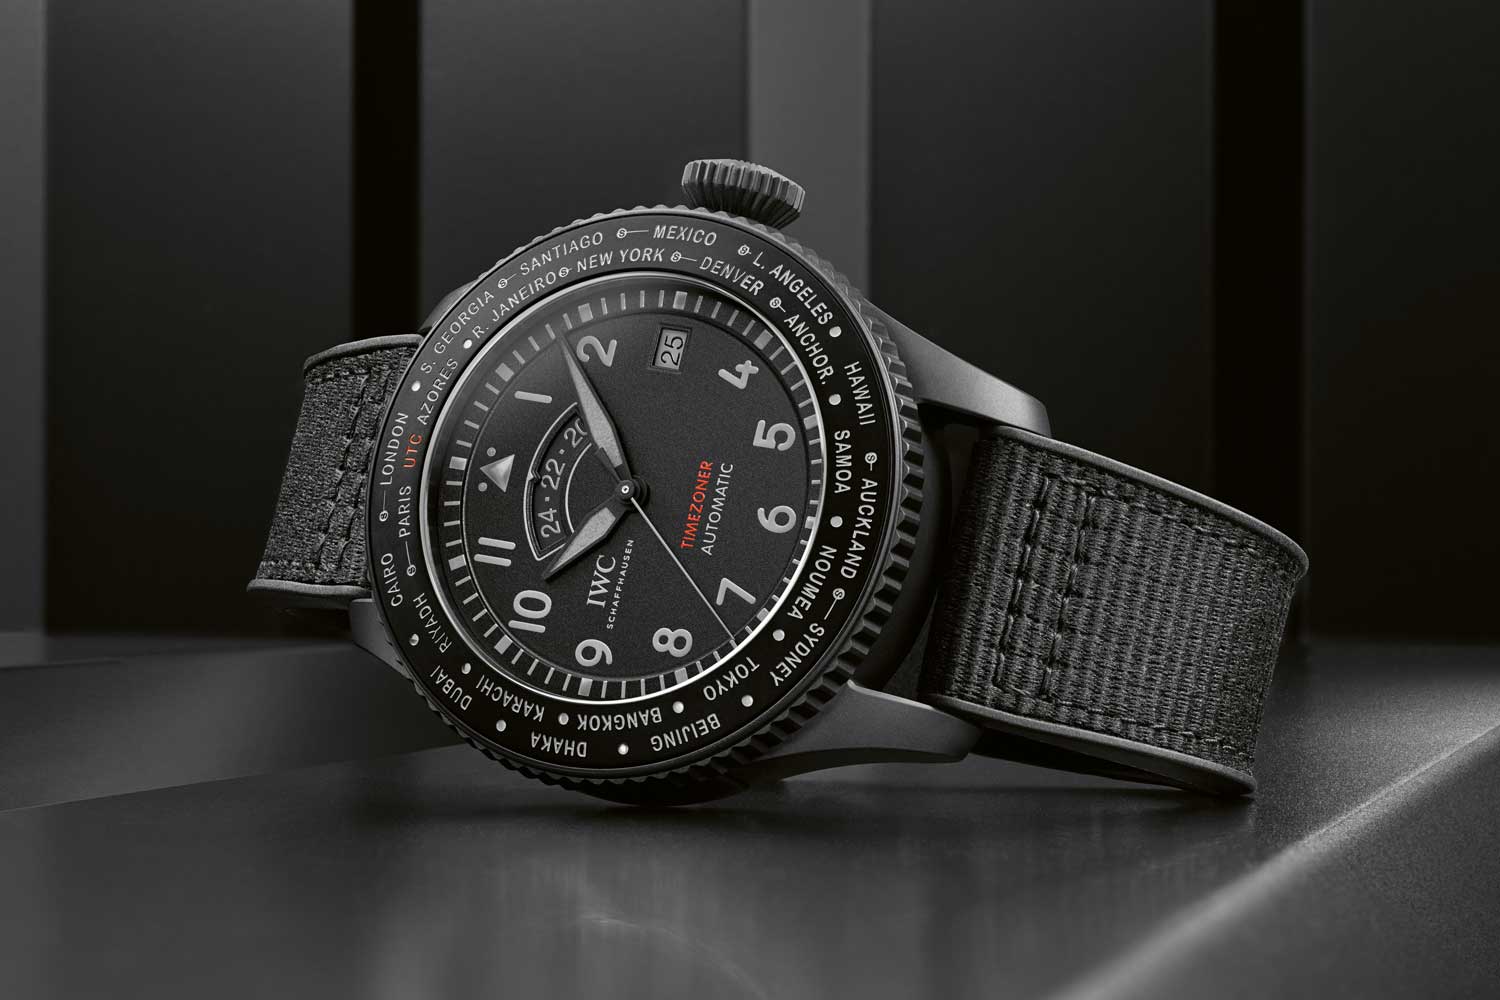 The Pilot's Watch Timezoner TOP GUN Ceratanium marks a stealthy, stylish new black-on-black look for IWC’s patented timezoner function line